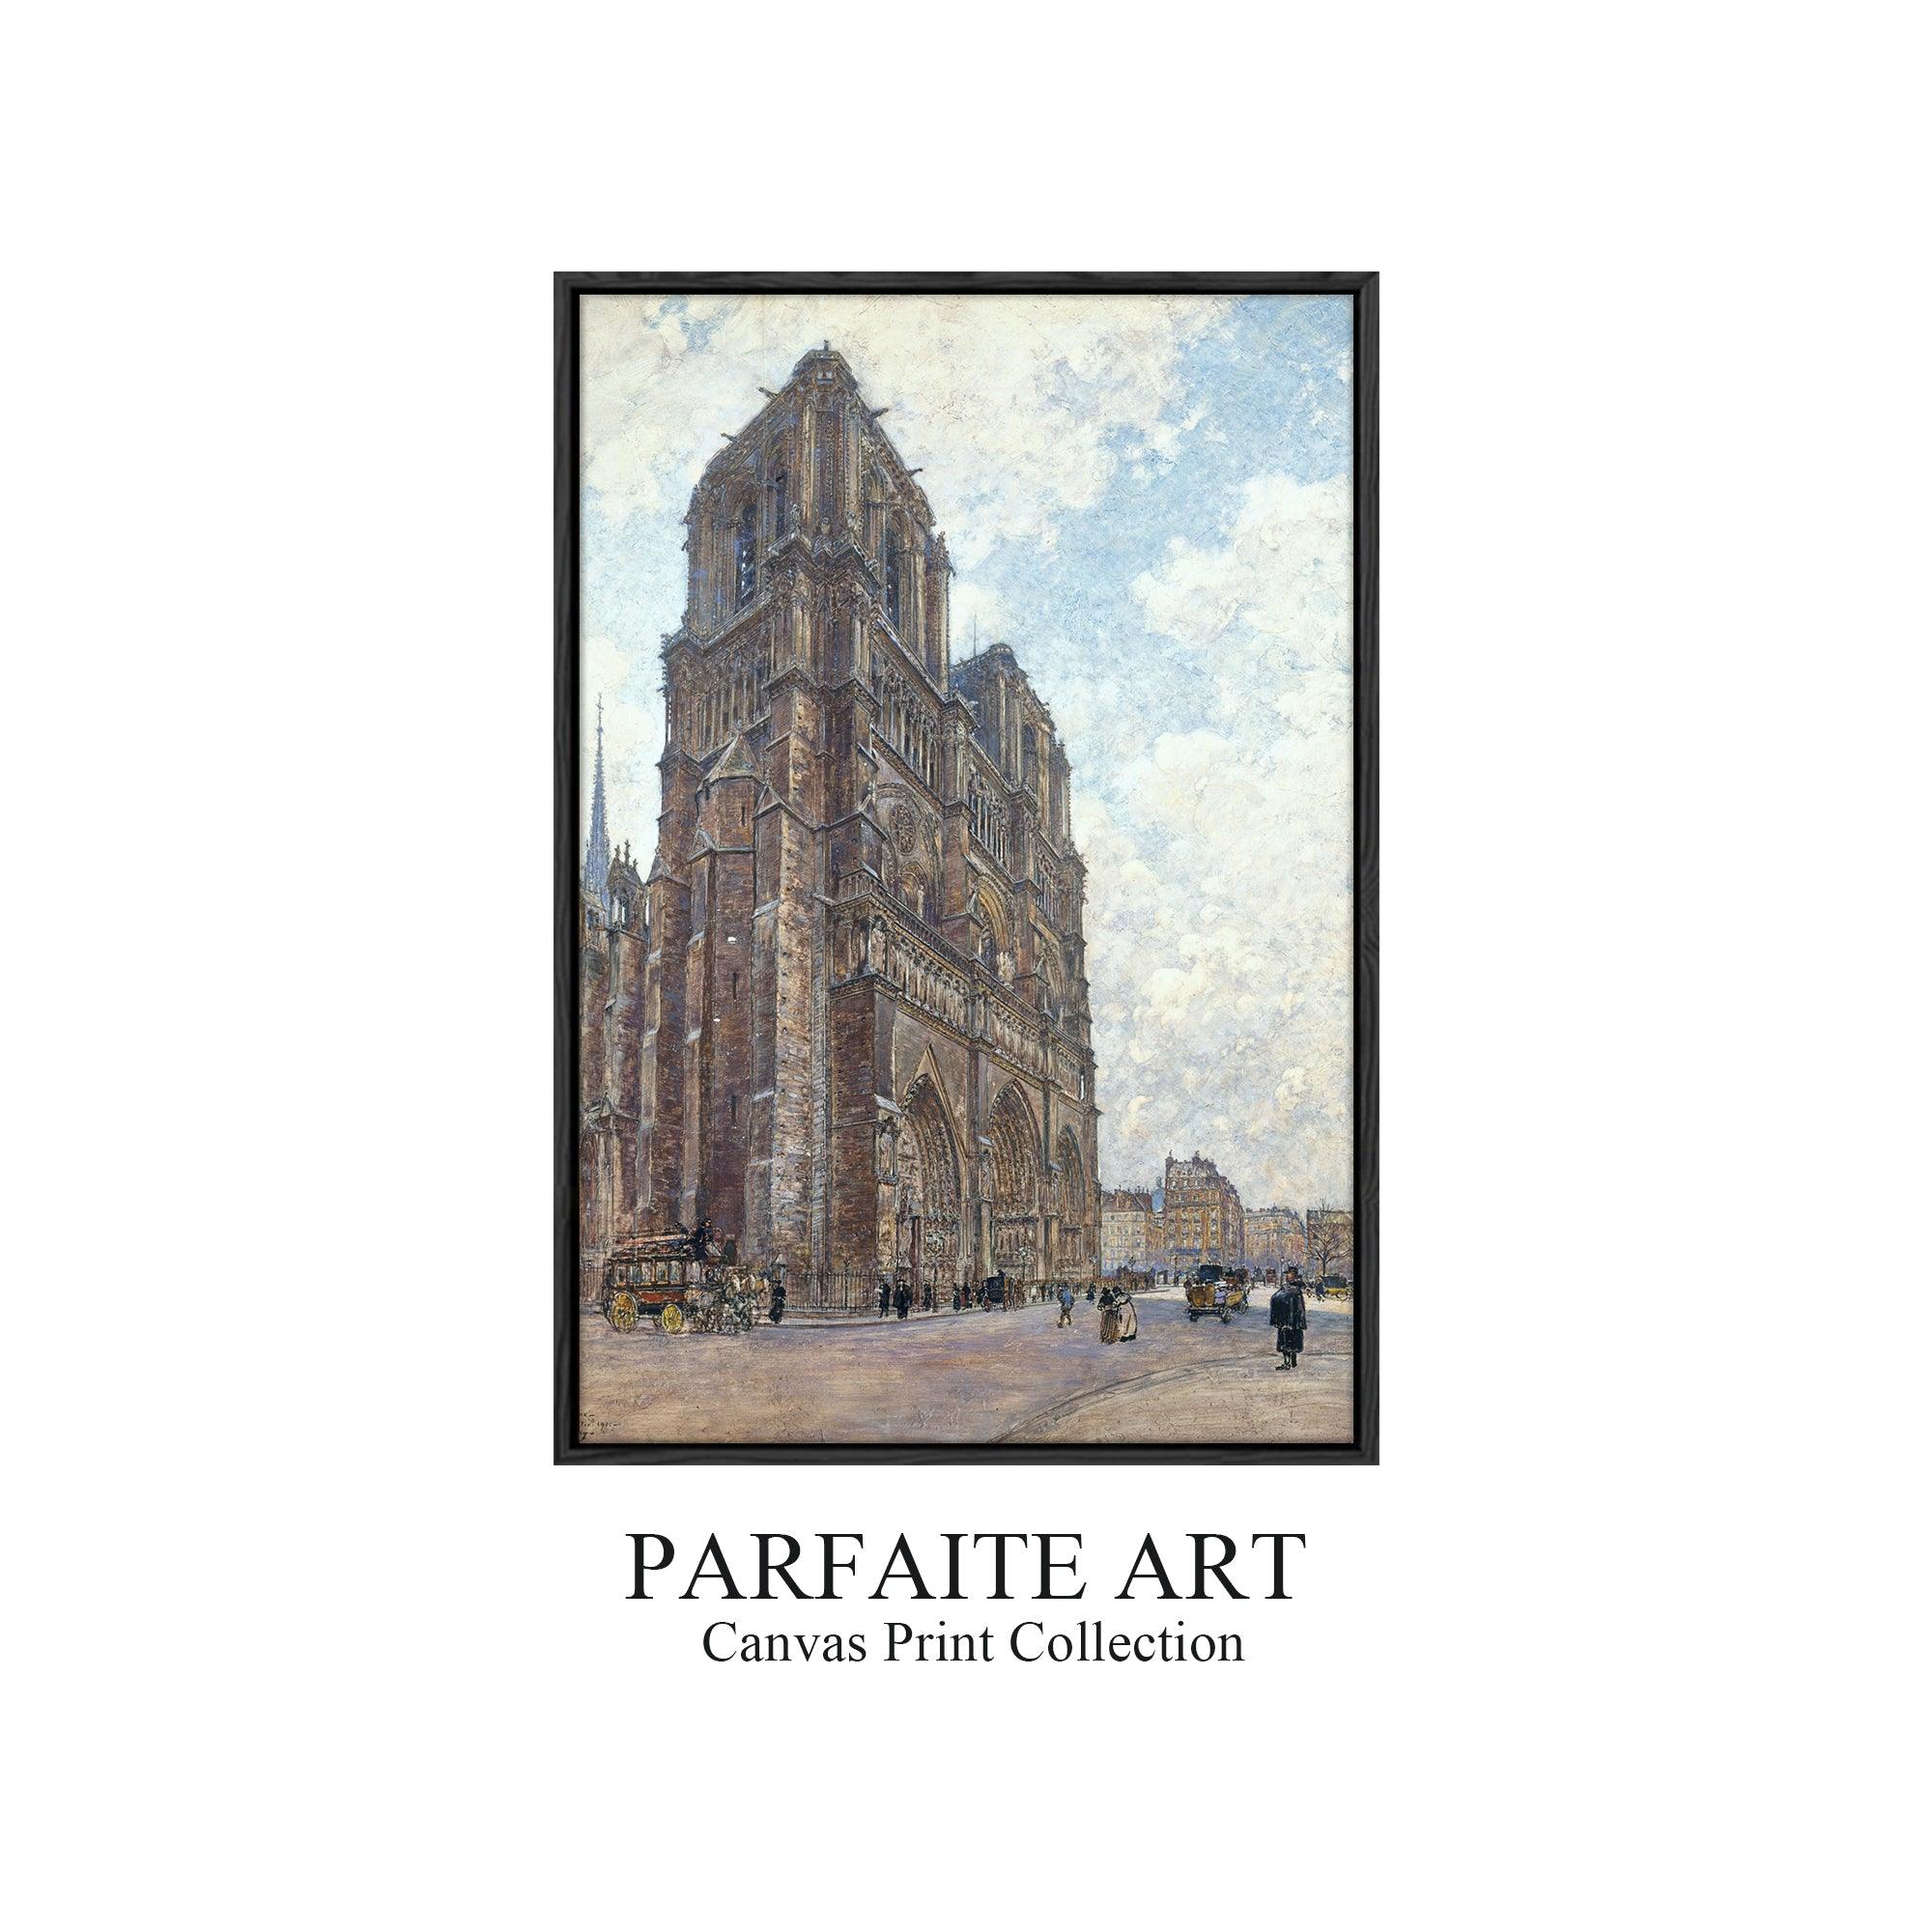 Giclée printed World Famous Paintings, Realistic Artworks and Architectural Landscapes on Printable Canvas #71 Black